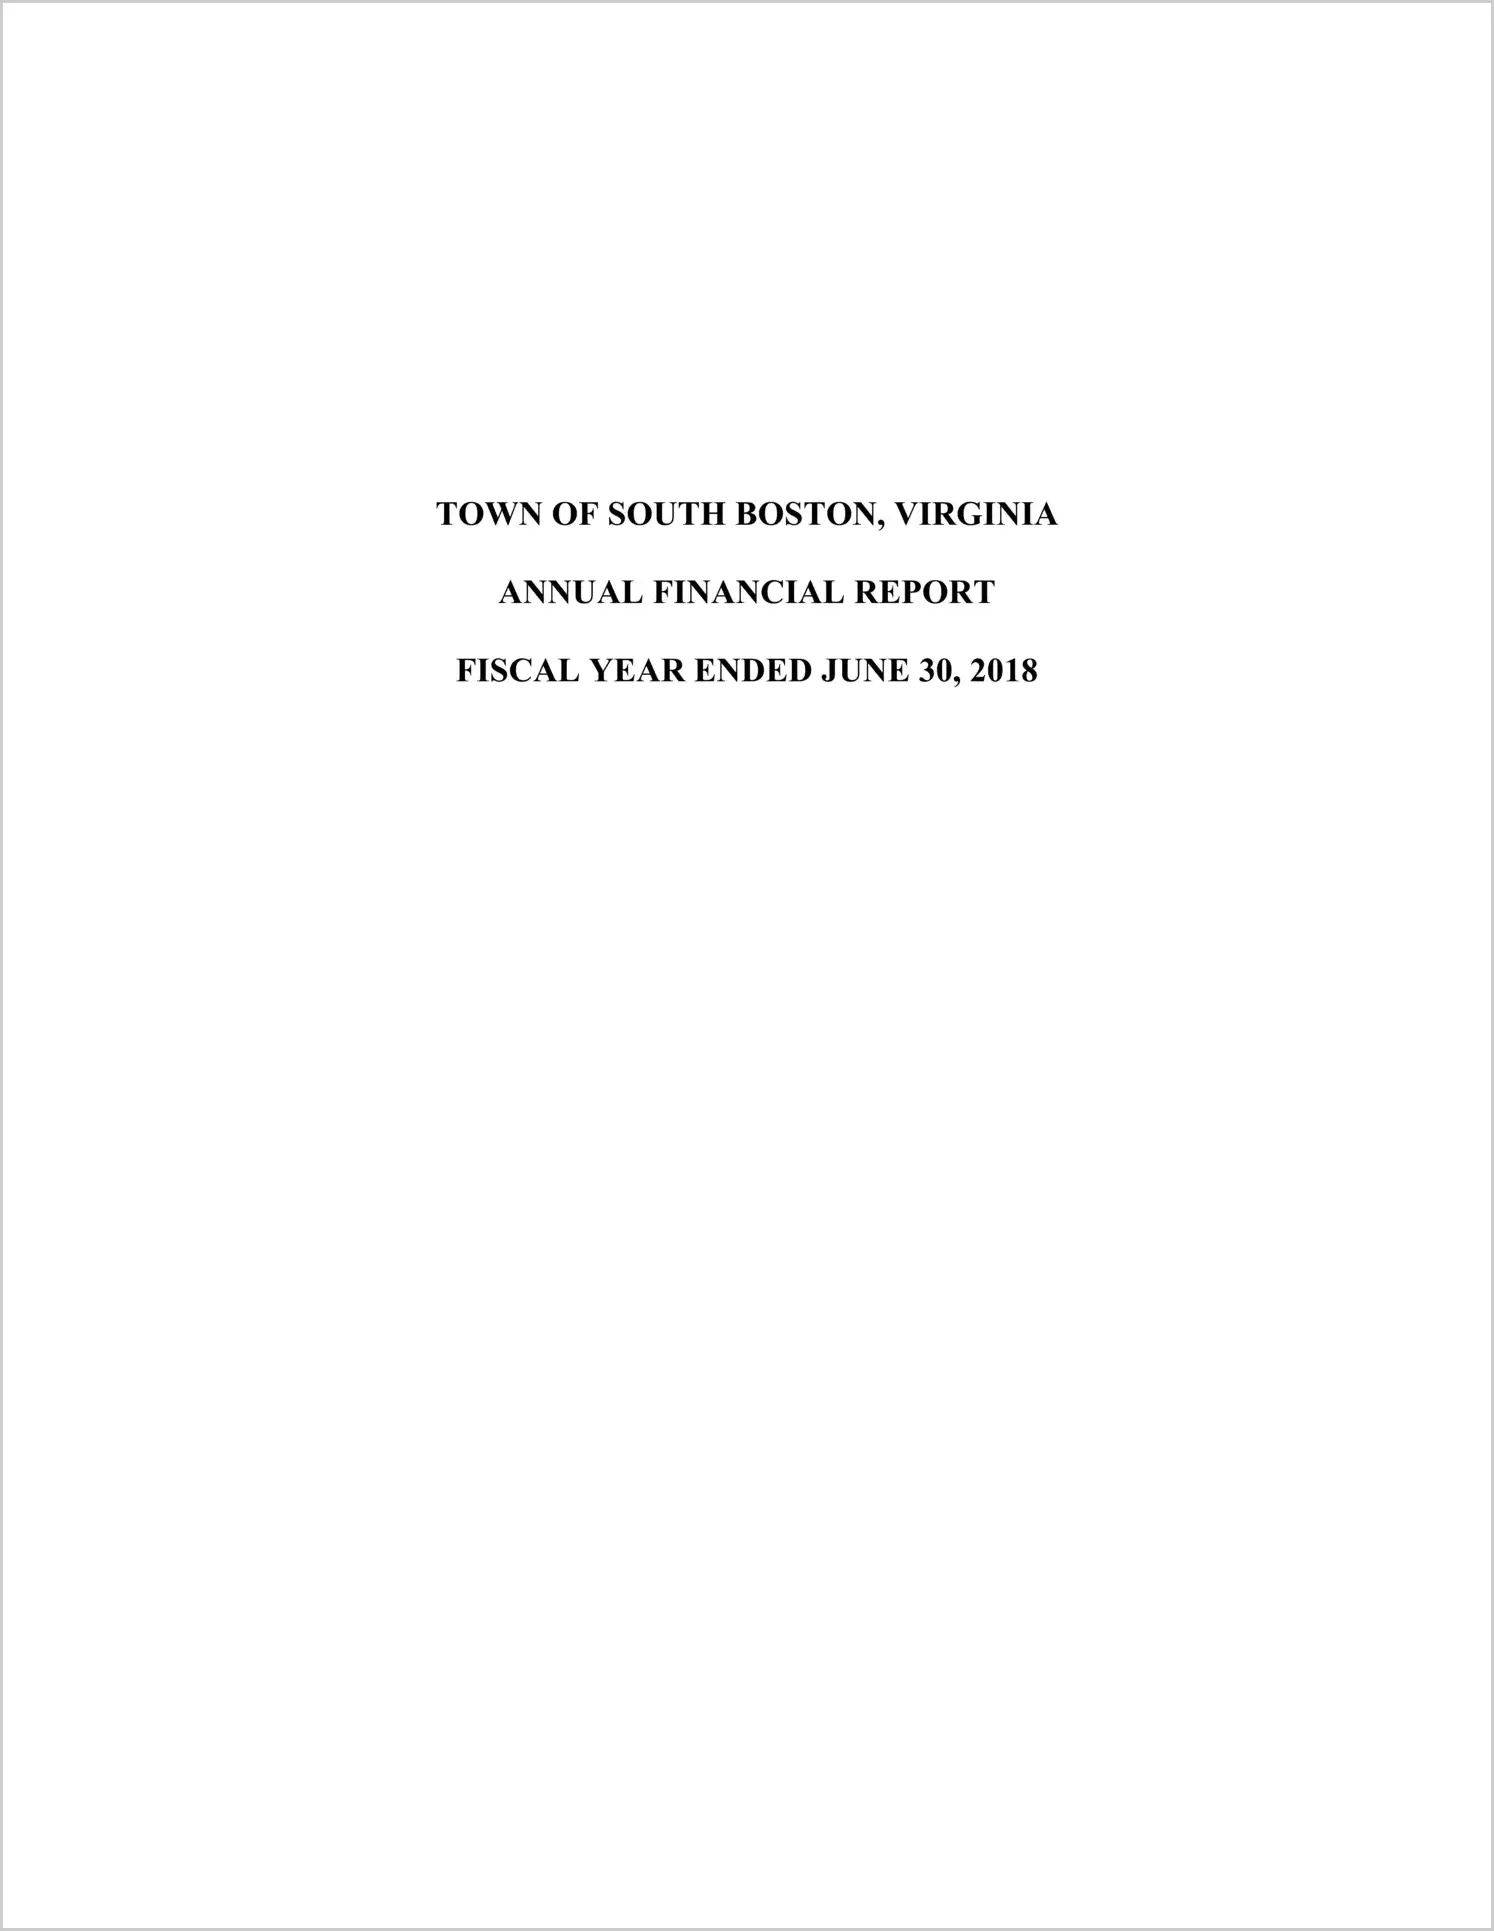 2018 Annual Financial Report for Town of South Boston